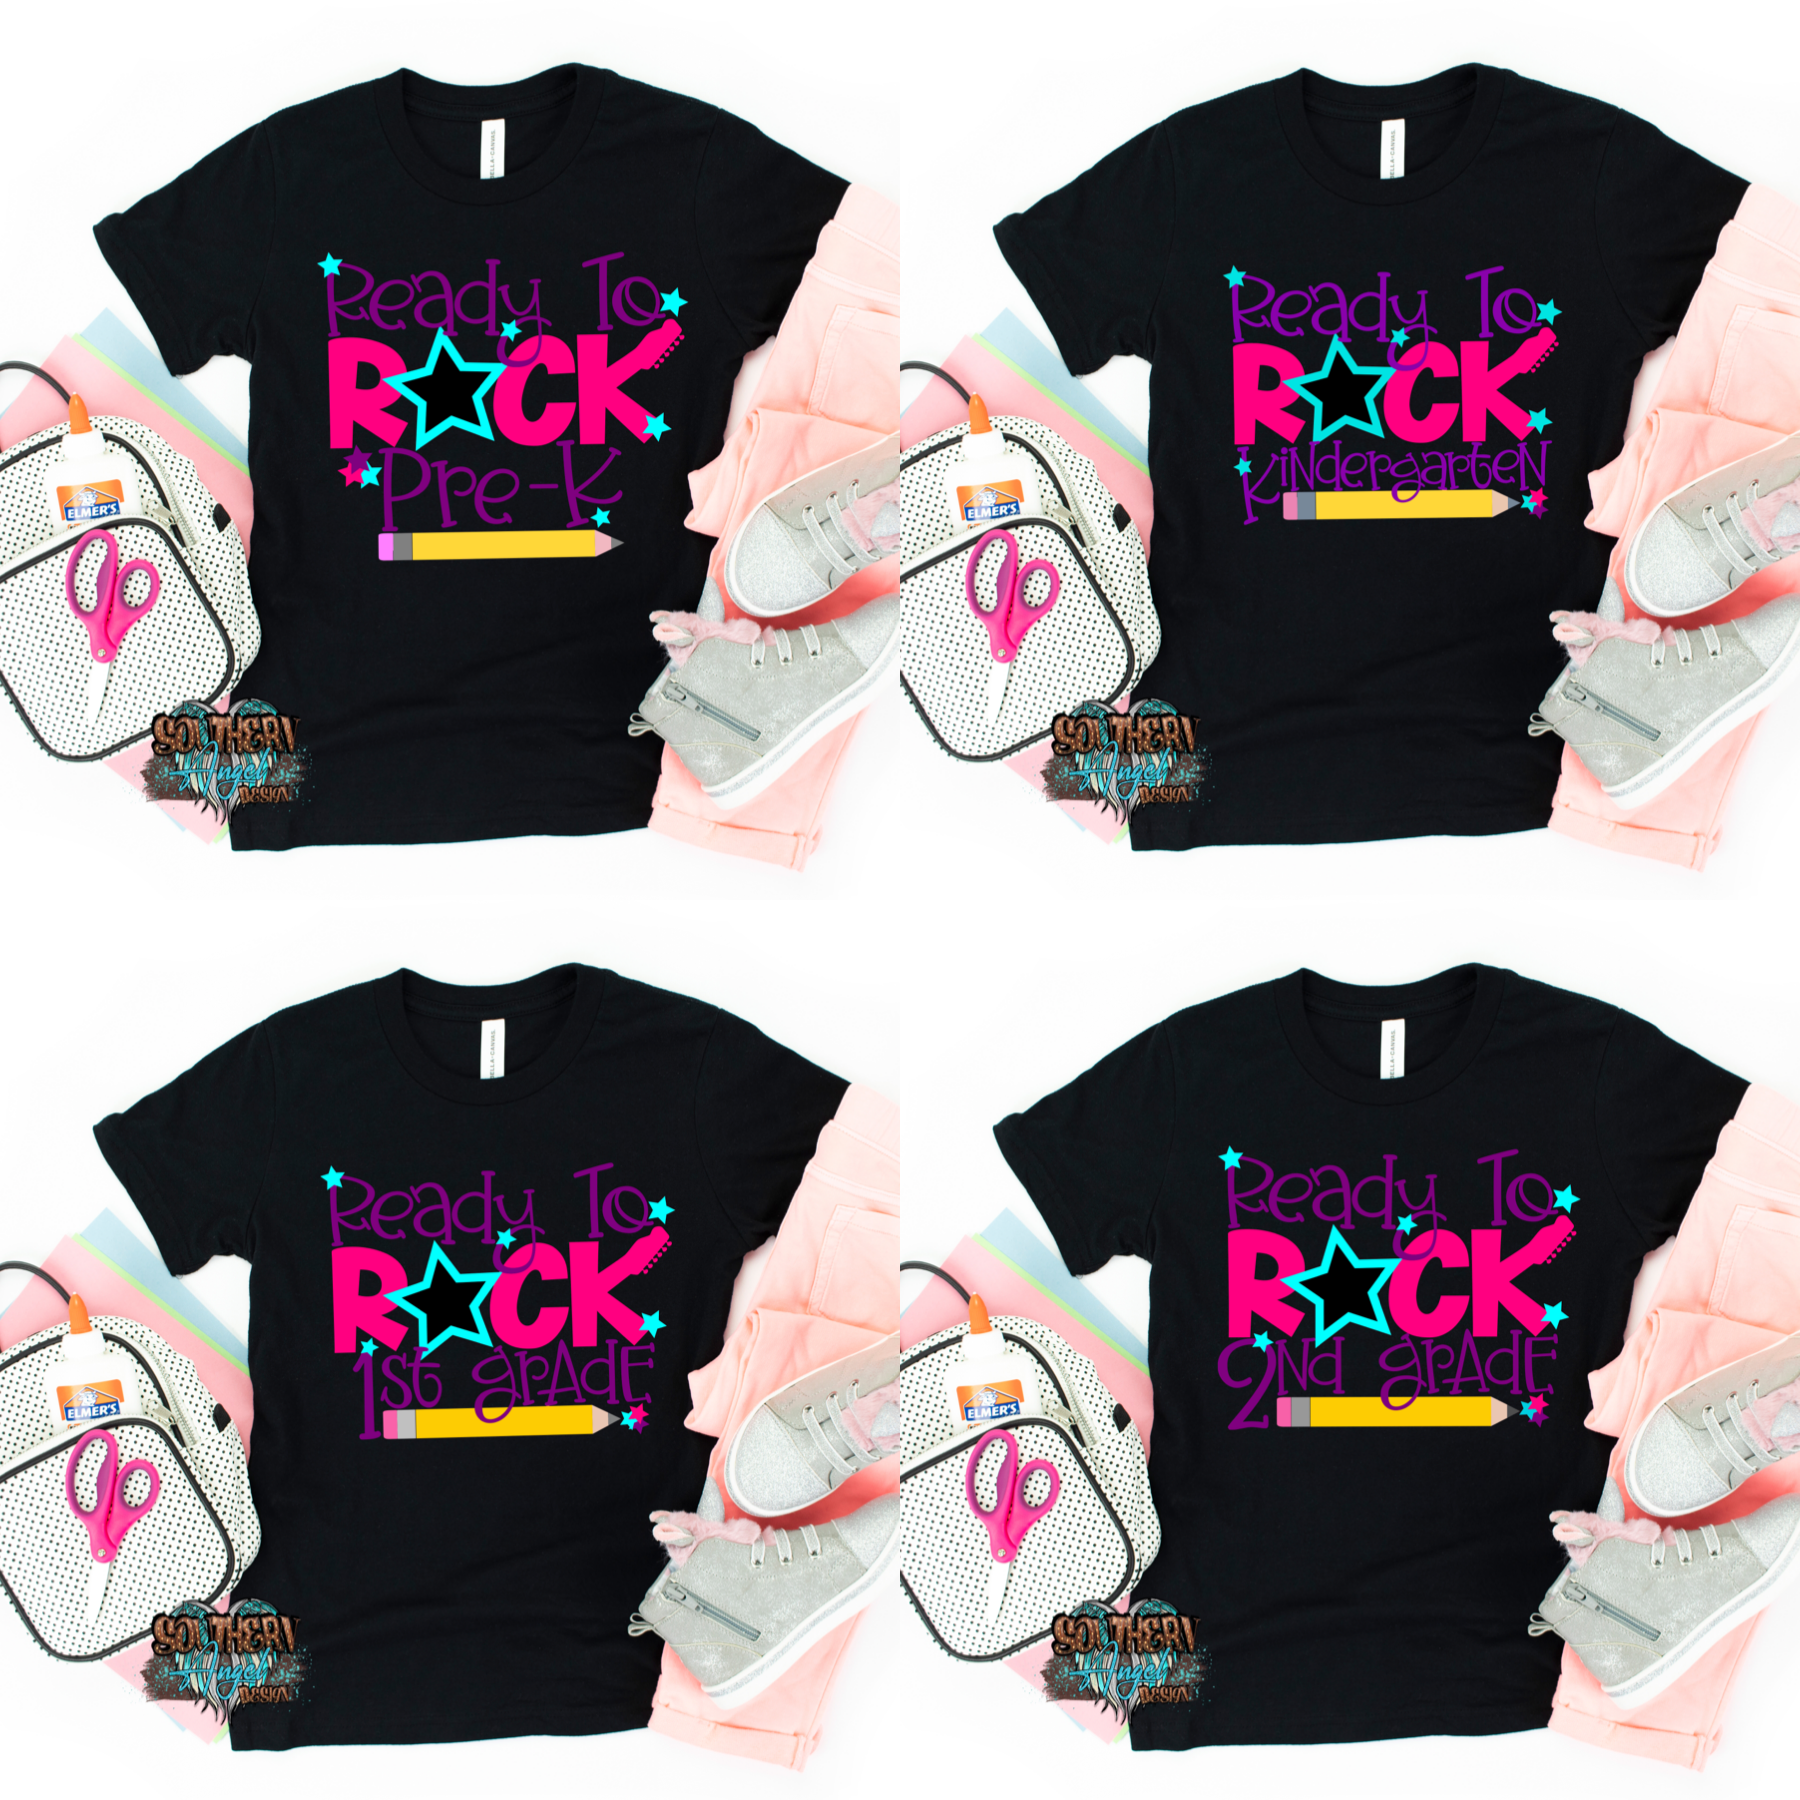 Black Ready To Rock Kindergarten image.png copy-of-ready-to-rock-first-day-of-school-preschool-5th-grade-2